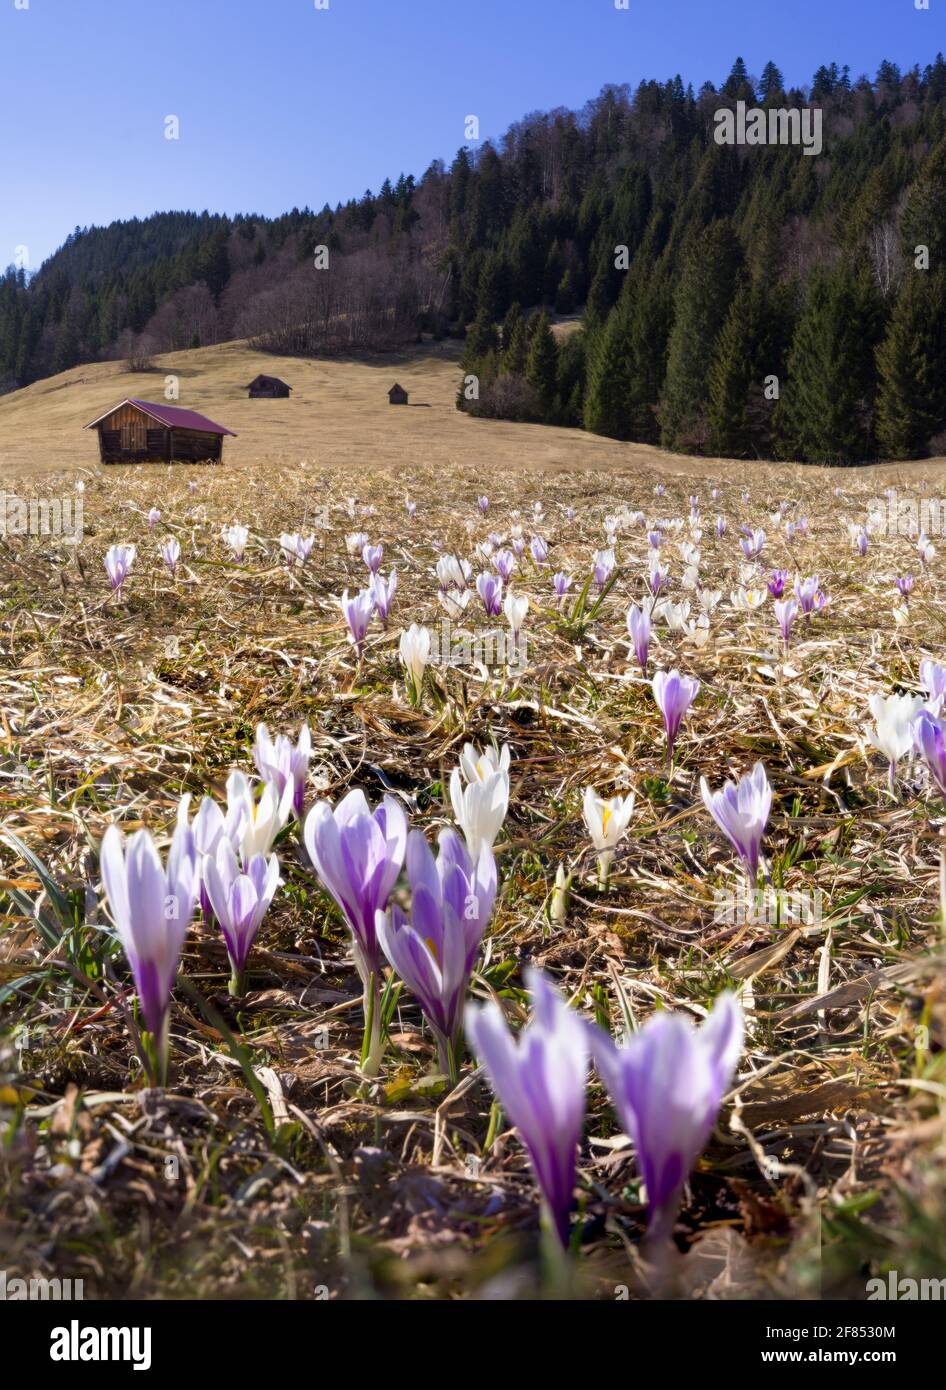 Spring in the mountains - crocuses blooming on meadow with wooden huts Stock Photo